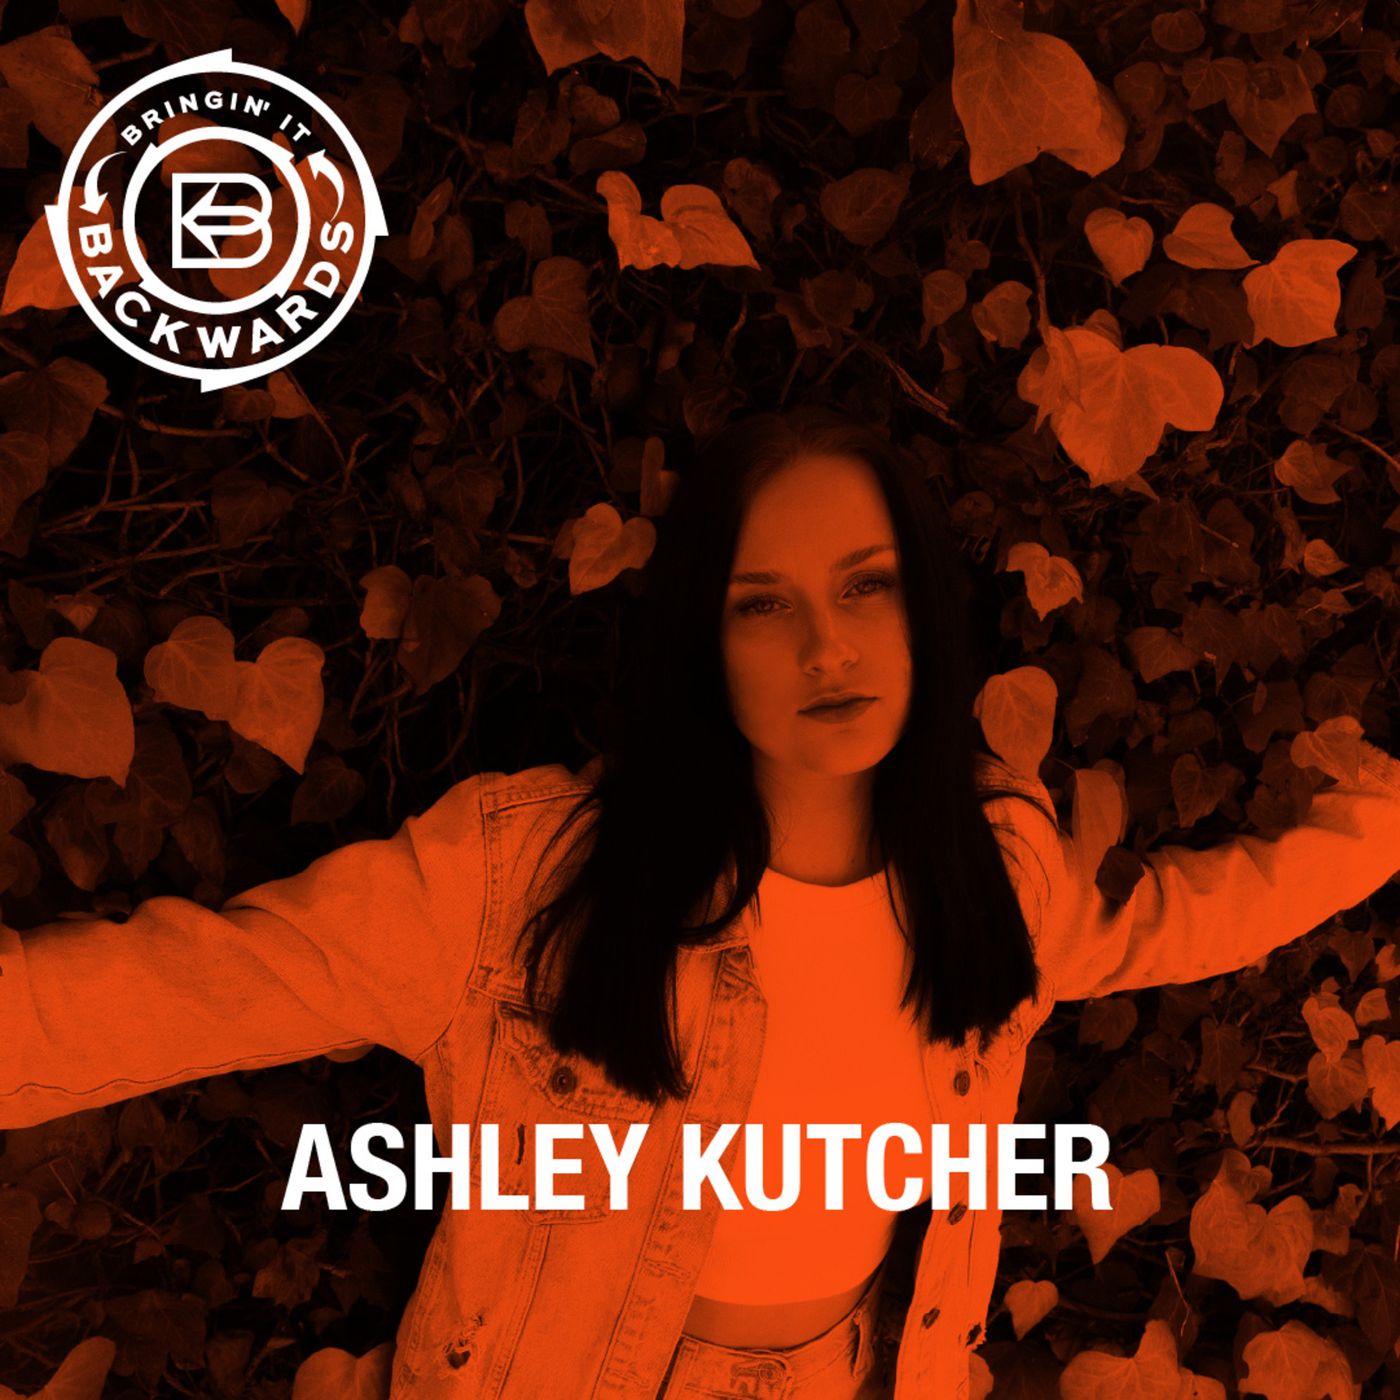 Interview with Ashley Kutcher Image